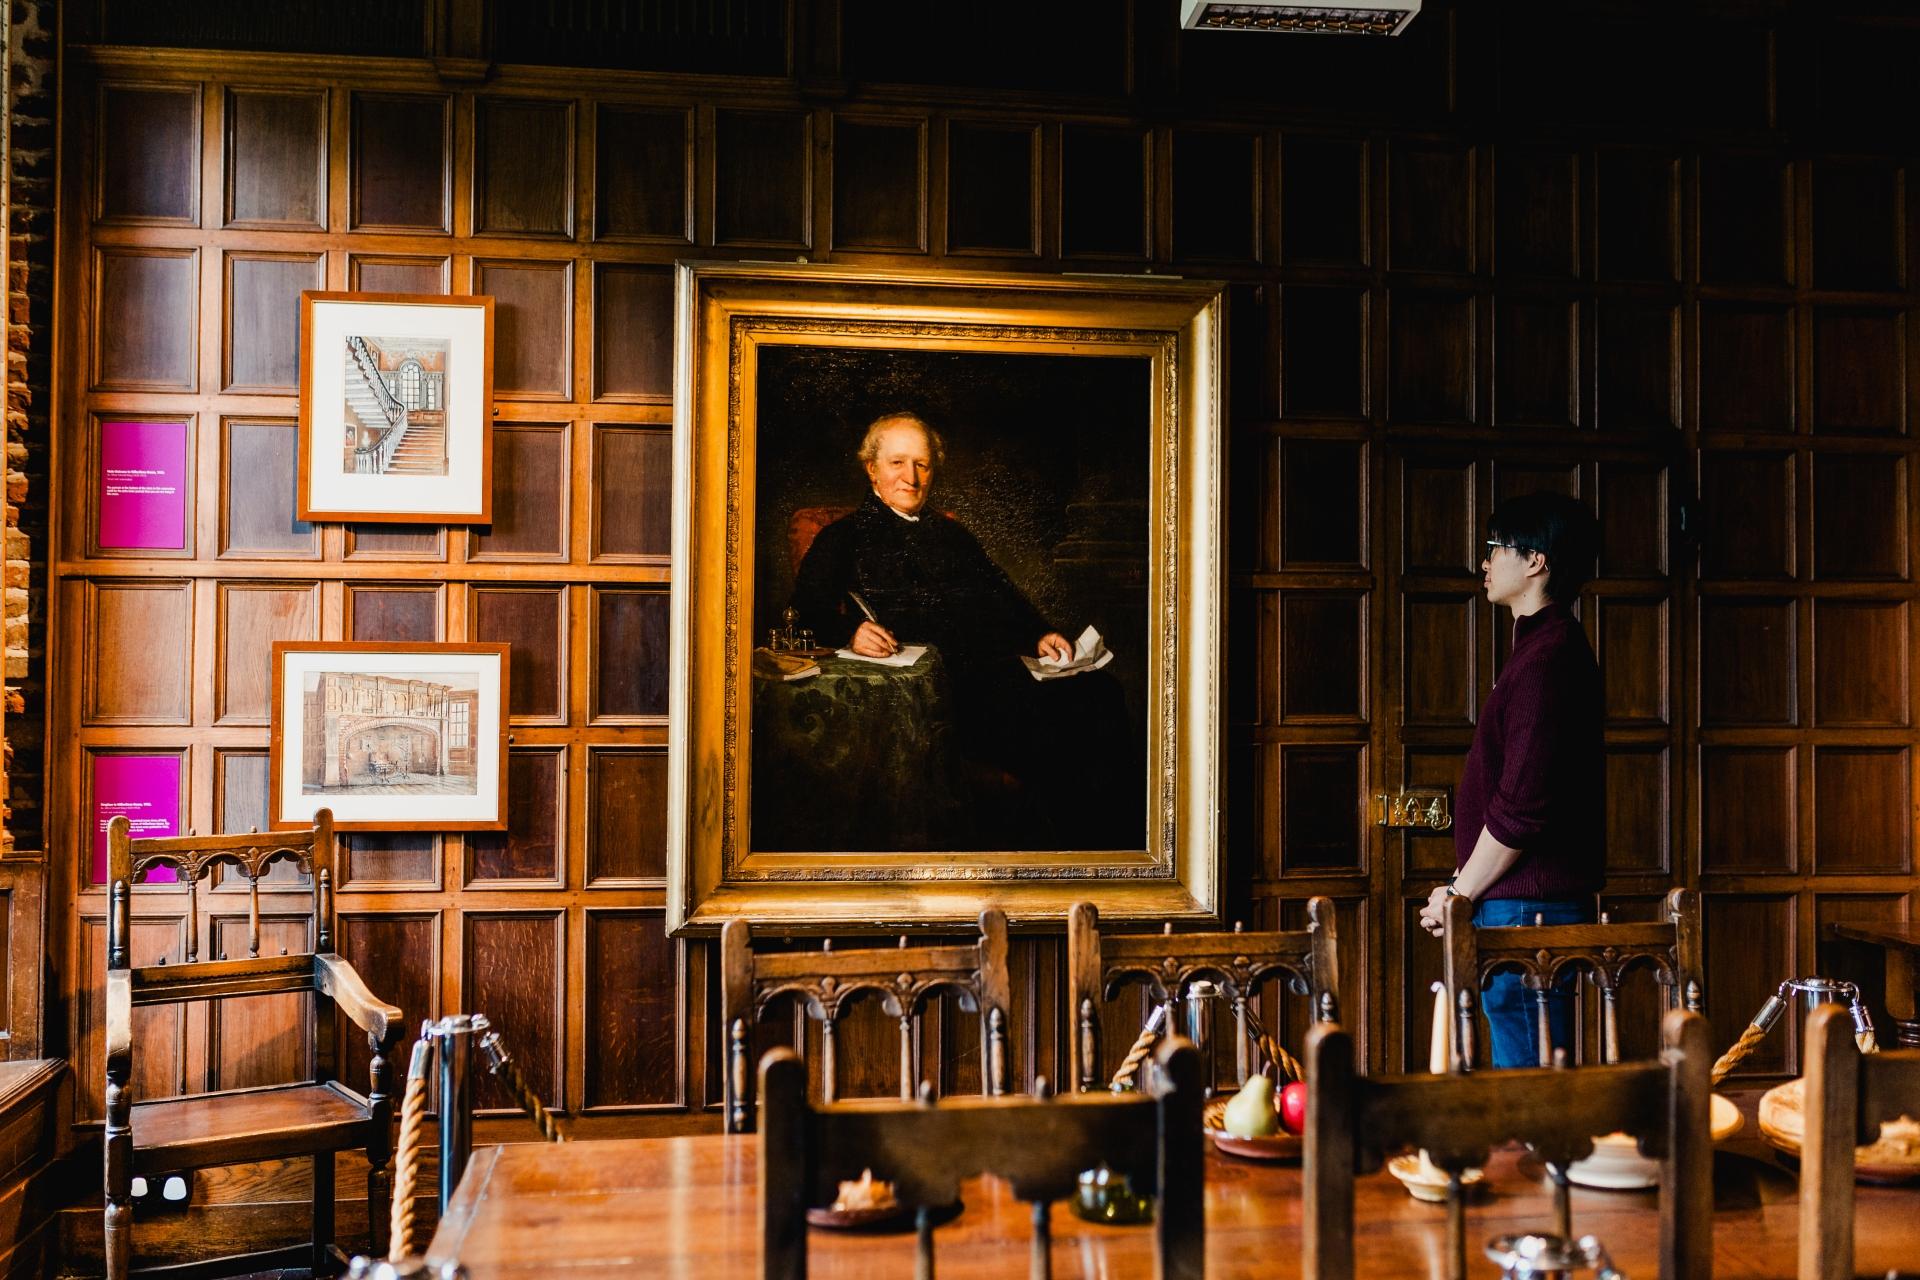 A man looking at a painting in a wooden panelled room with a wooden desk and chairs.